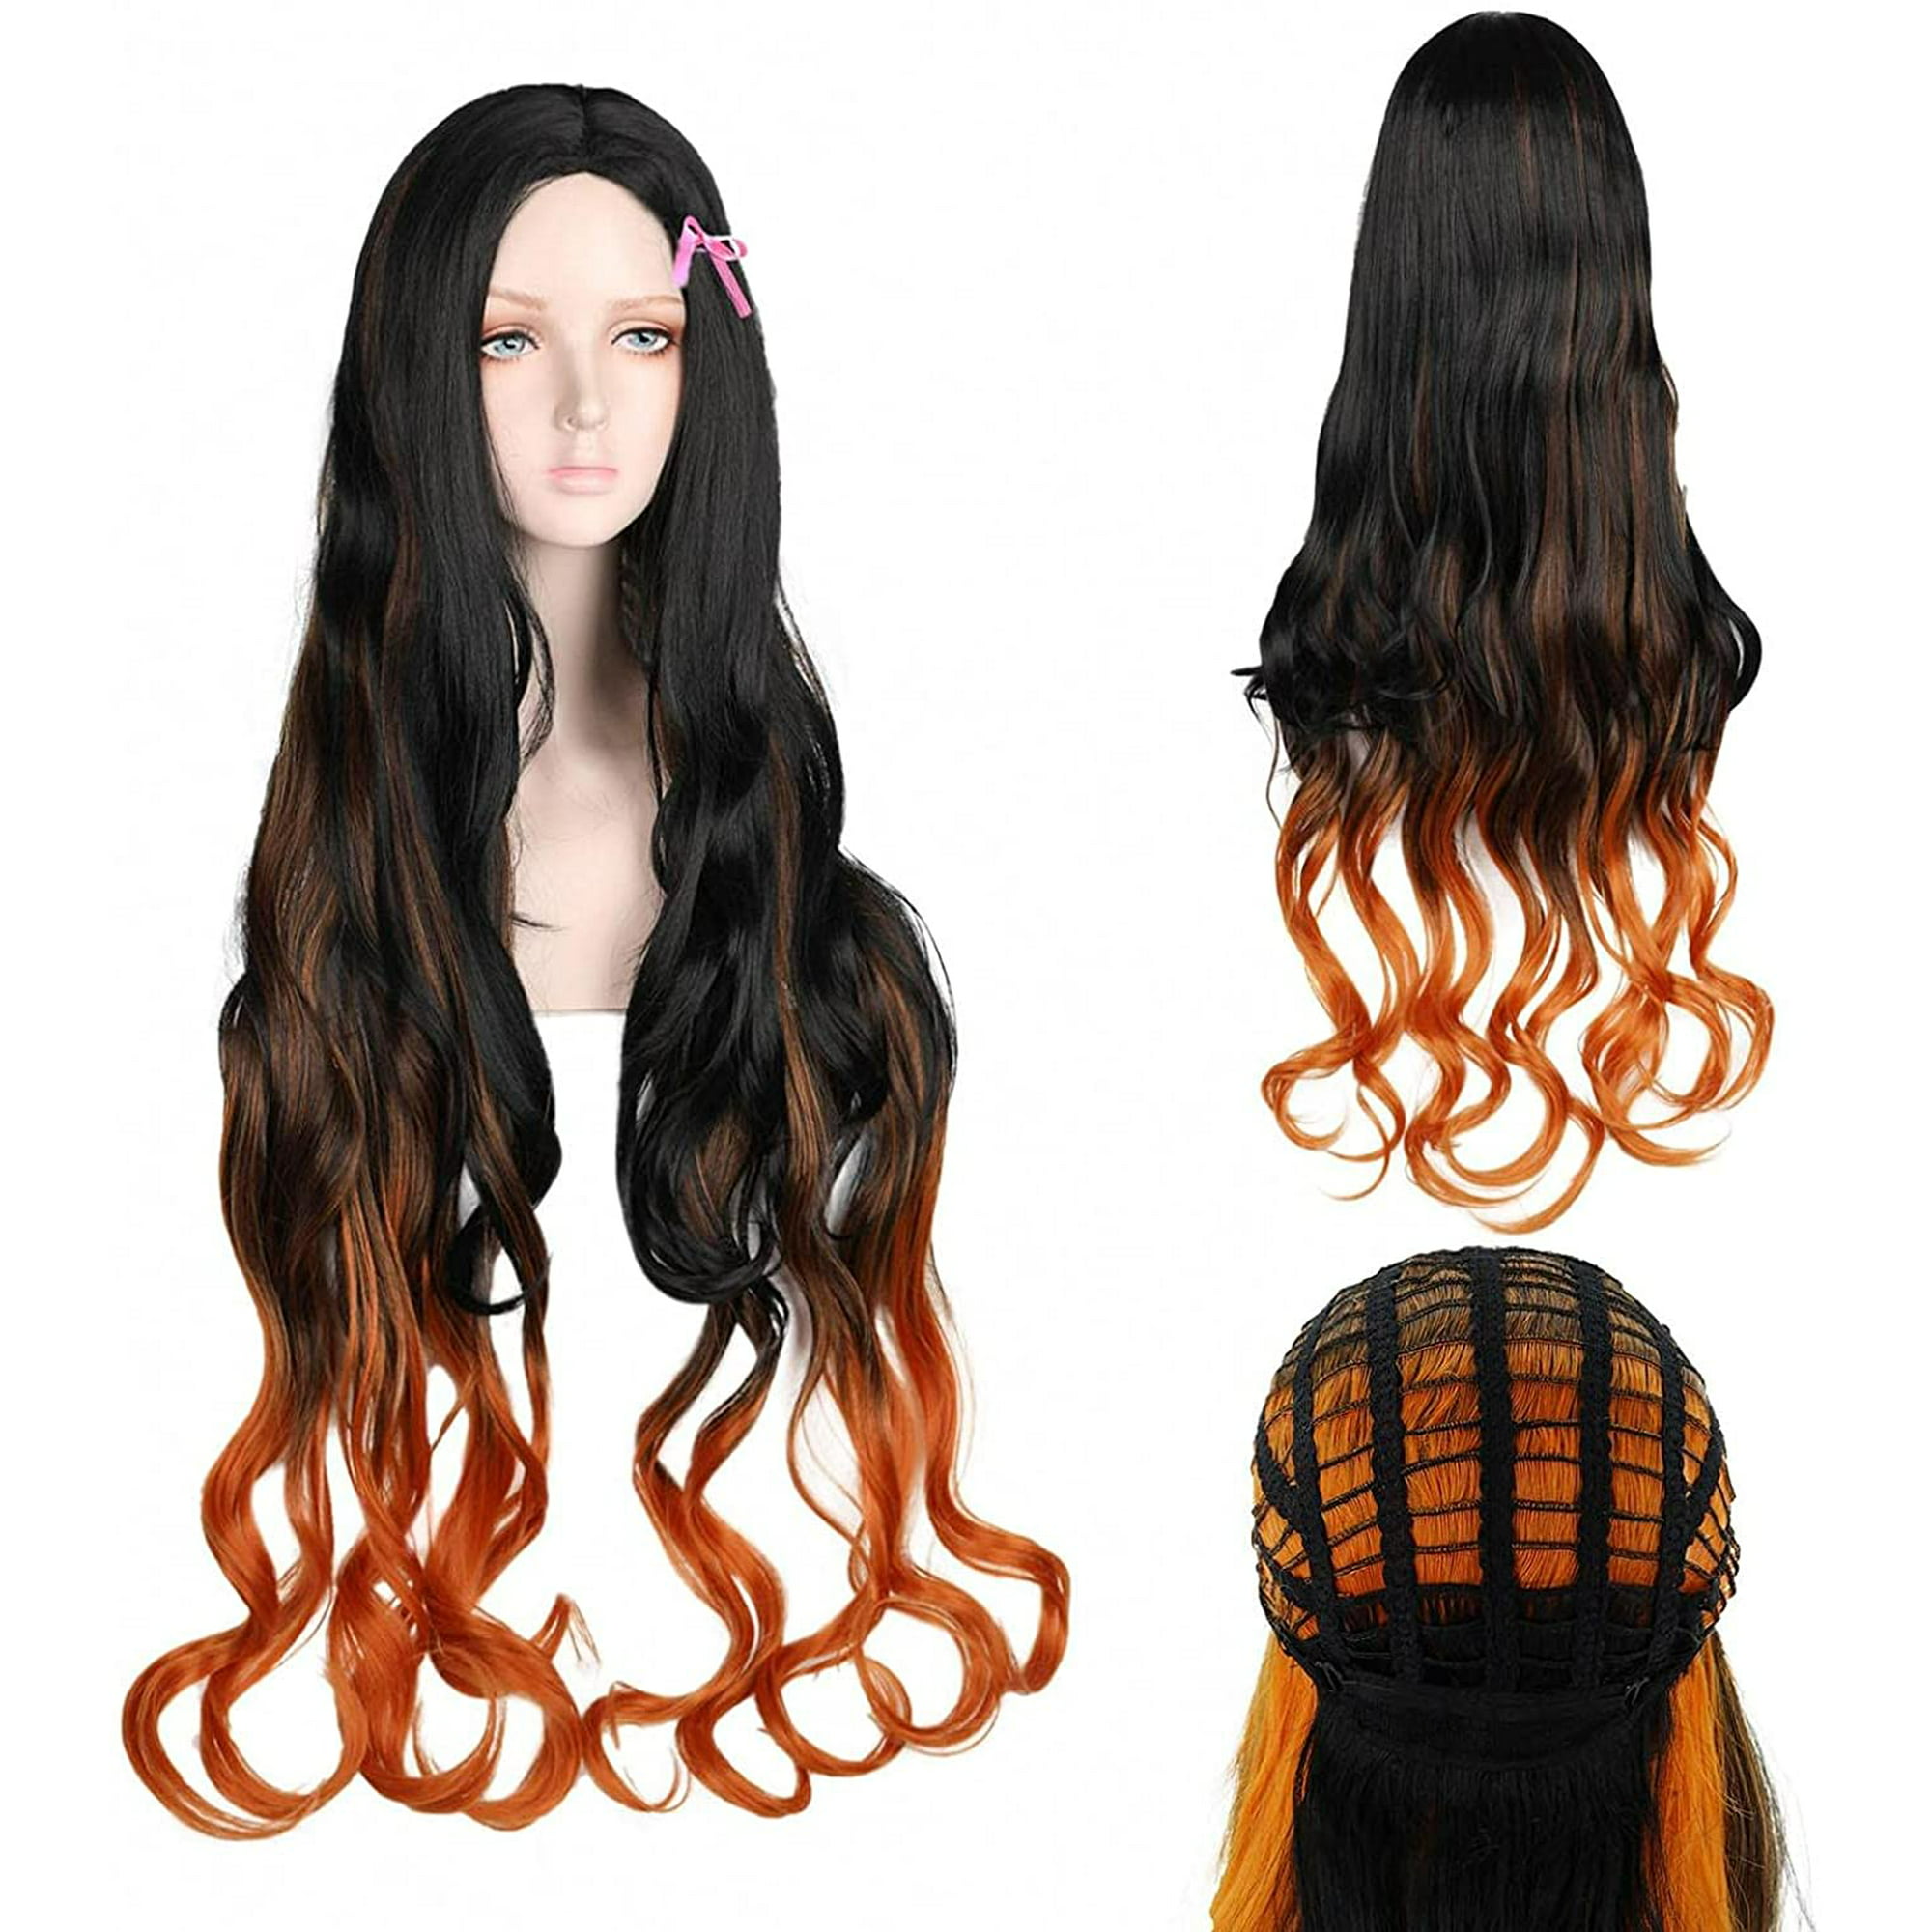 Anime Kamado Nezuko Cosplay Wigs,Ombre Black Orange Gradient Long Curly Hair  Role Play Hair Wigs,100% Brand Soft Natural Wavy 150% Density,No Tangle,No  Shedding for costume party '' | Walmart Canada